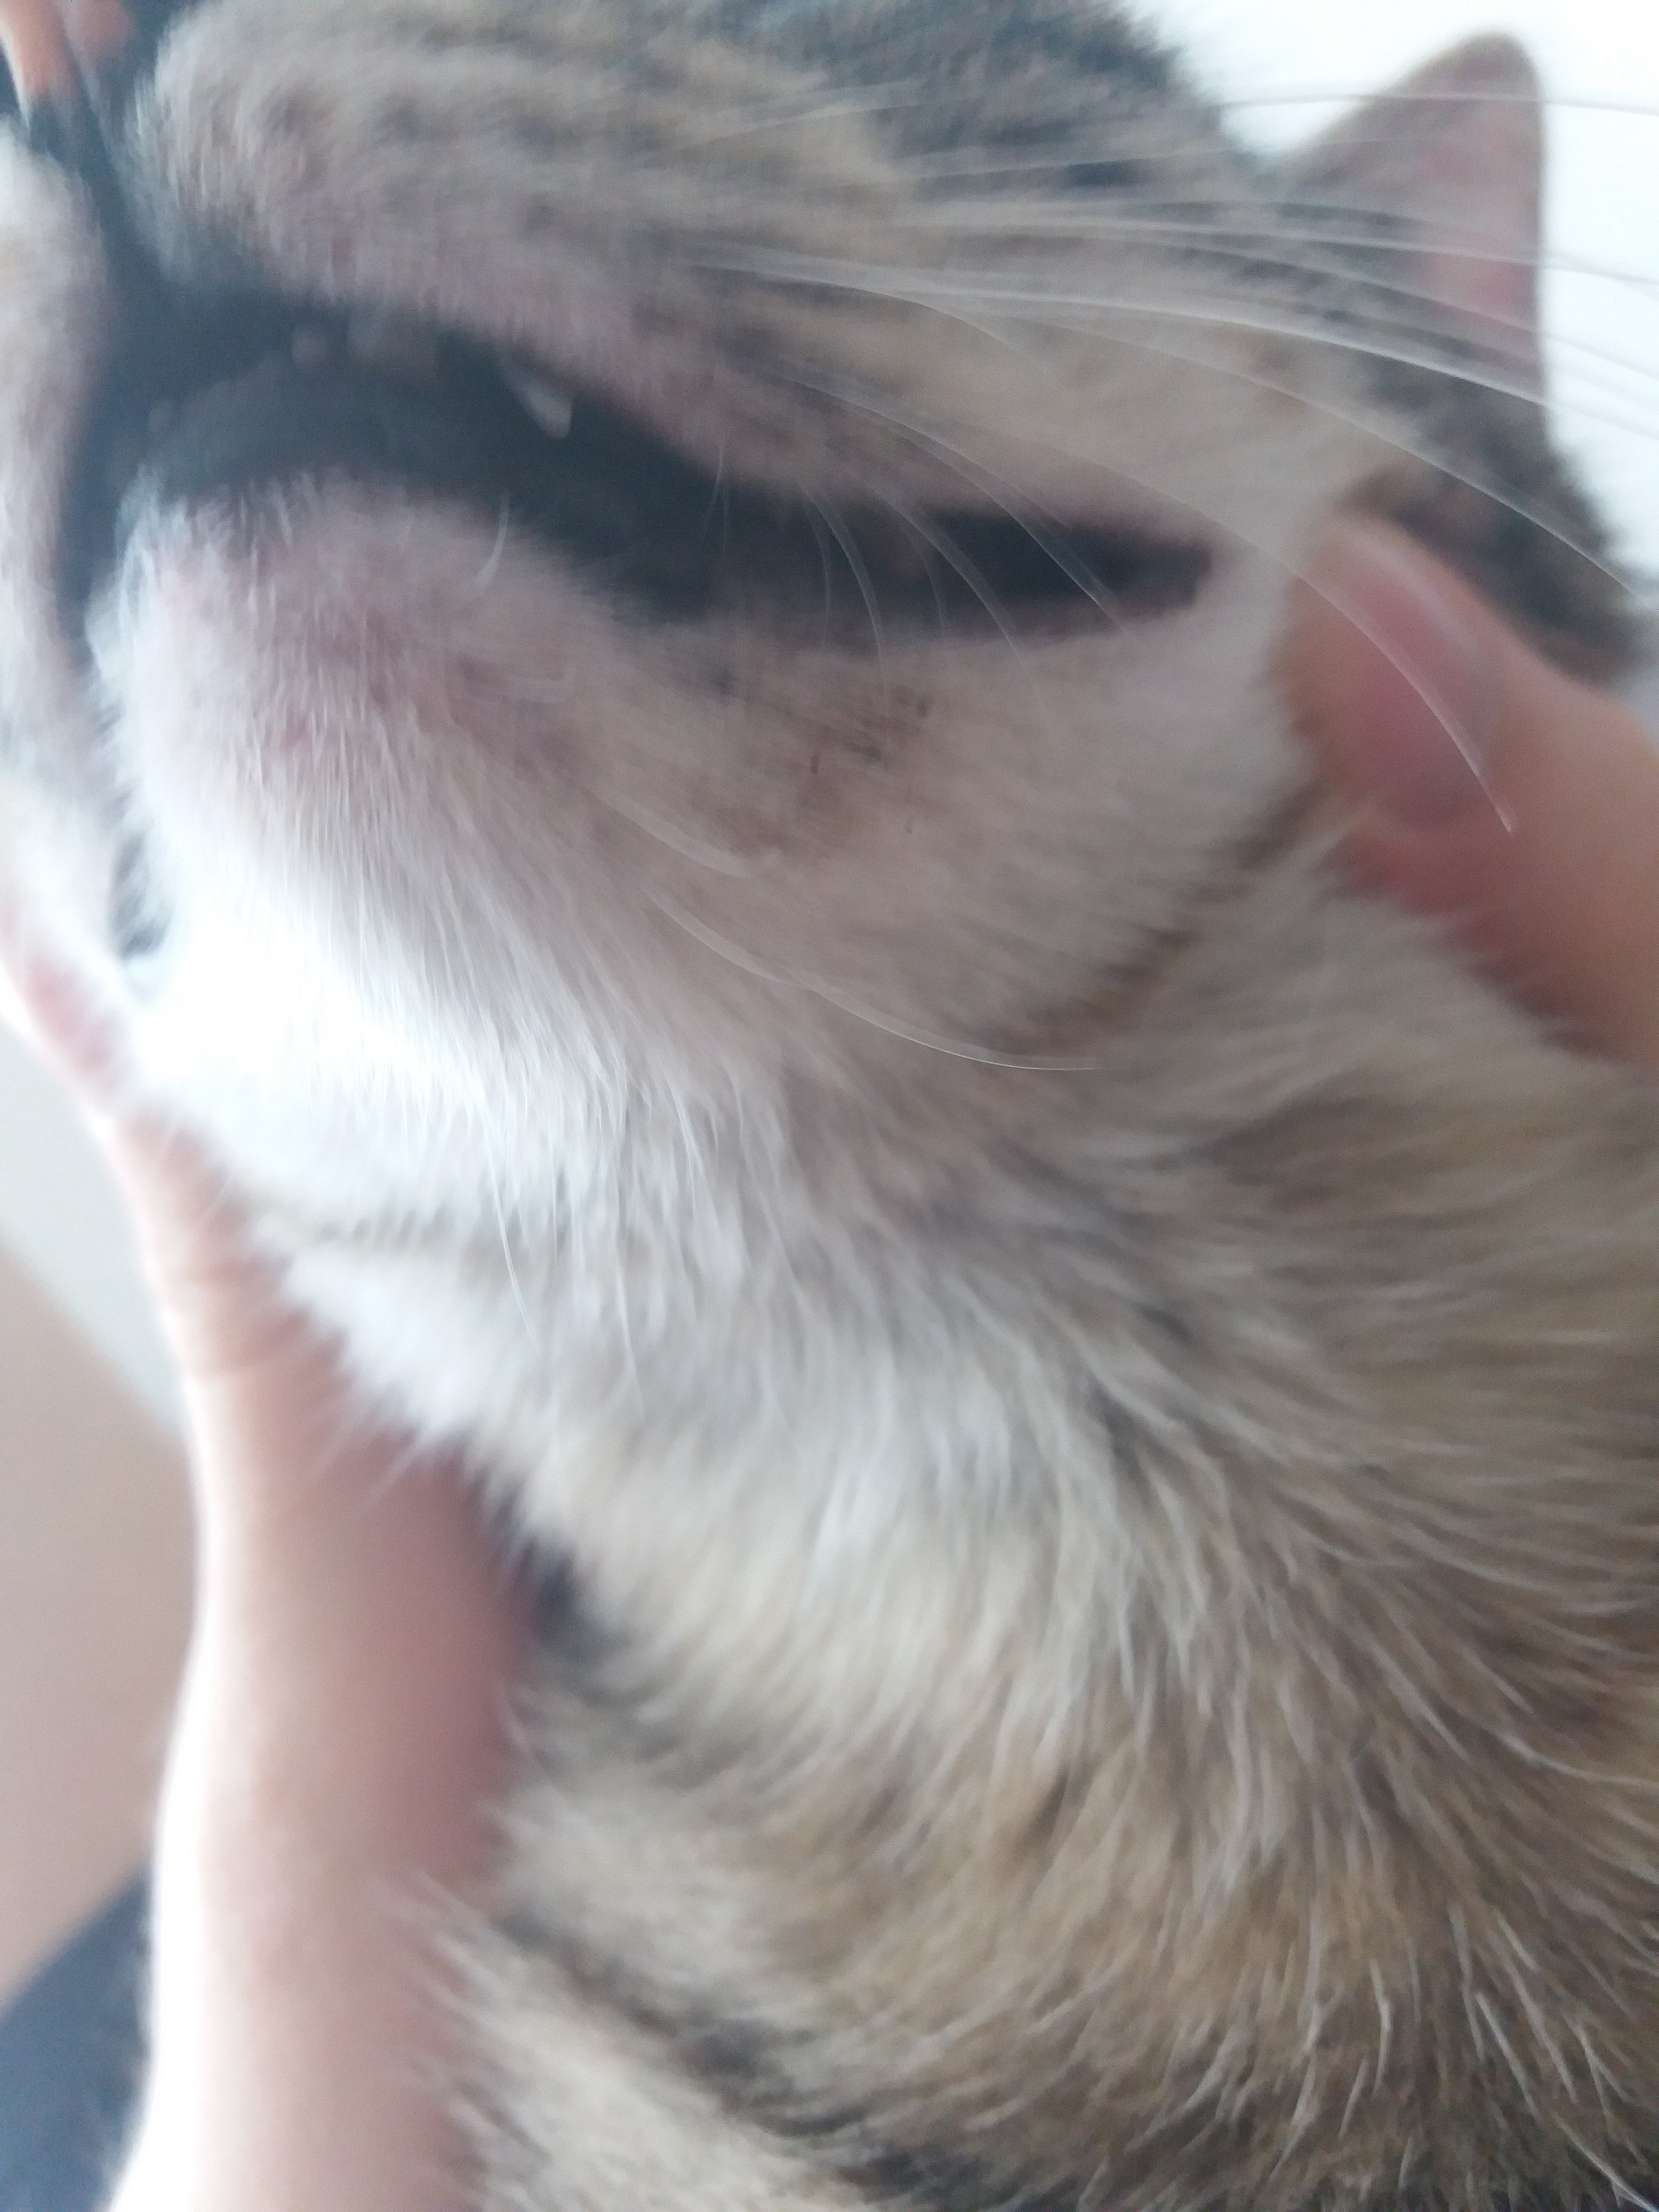 Cat's Skin Has Many Red Spots And He Seems Itchy (pictures) TheCatSite